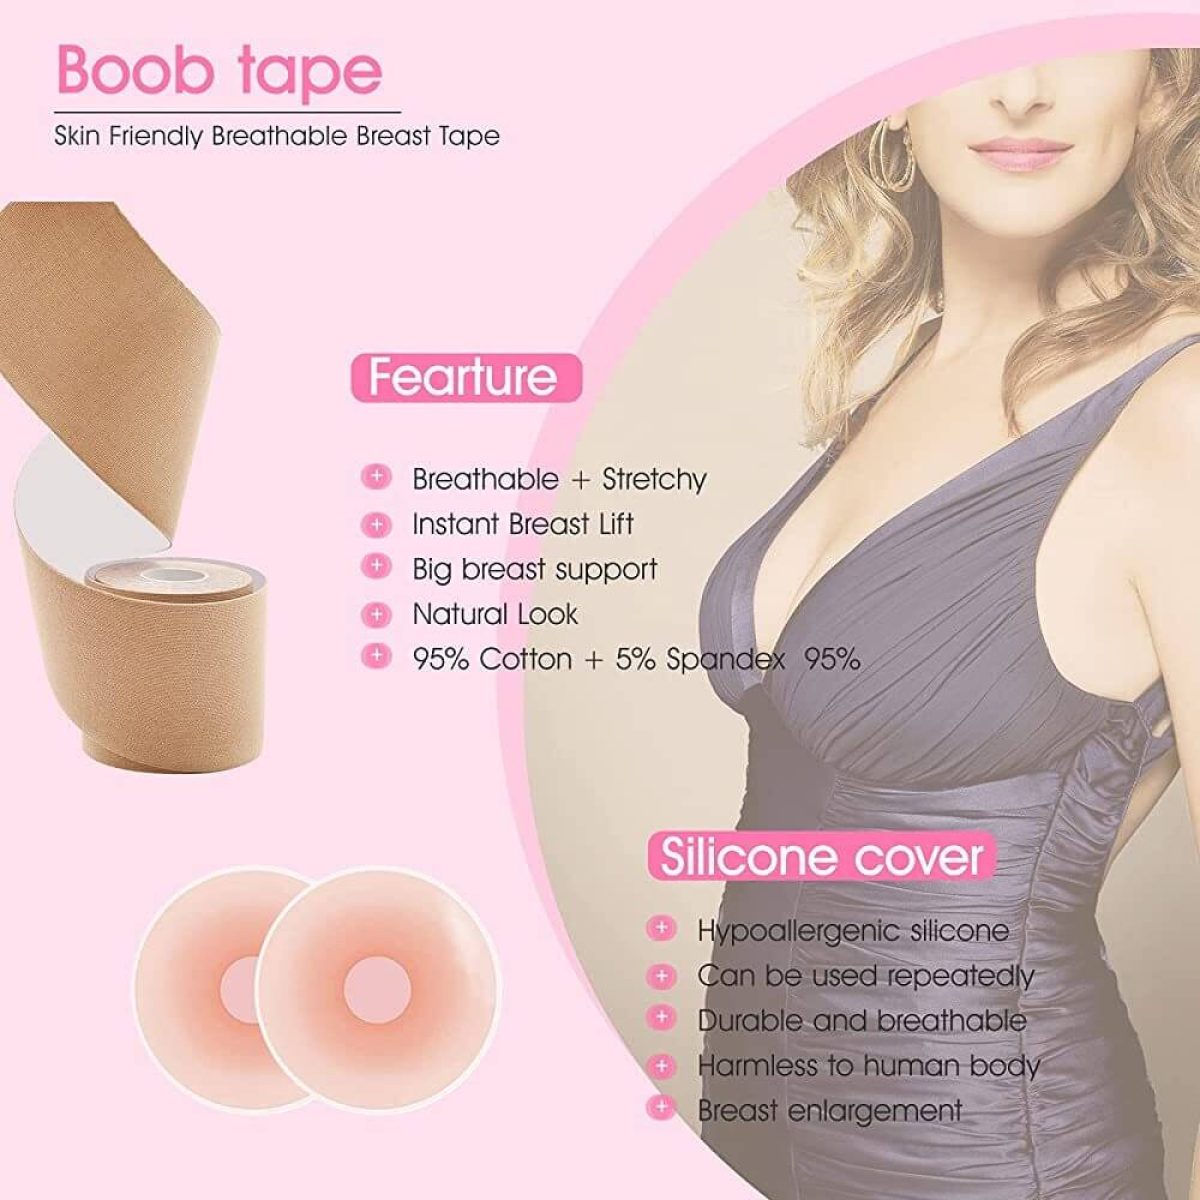 Boob Tape with Silicon Breast Cover for Breast Lift 5mtr